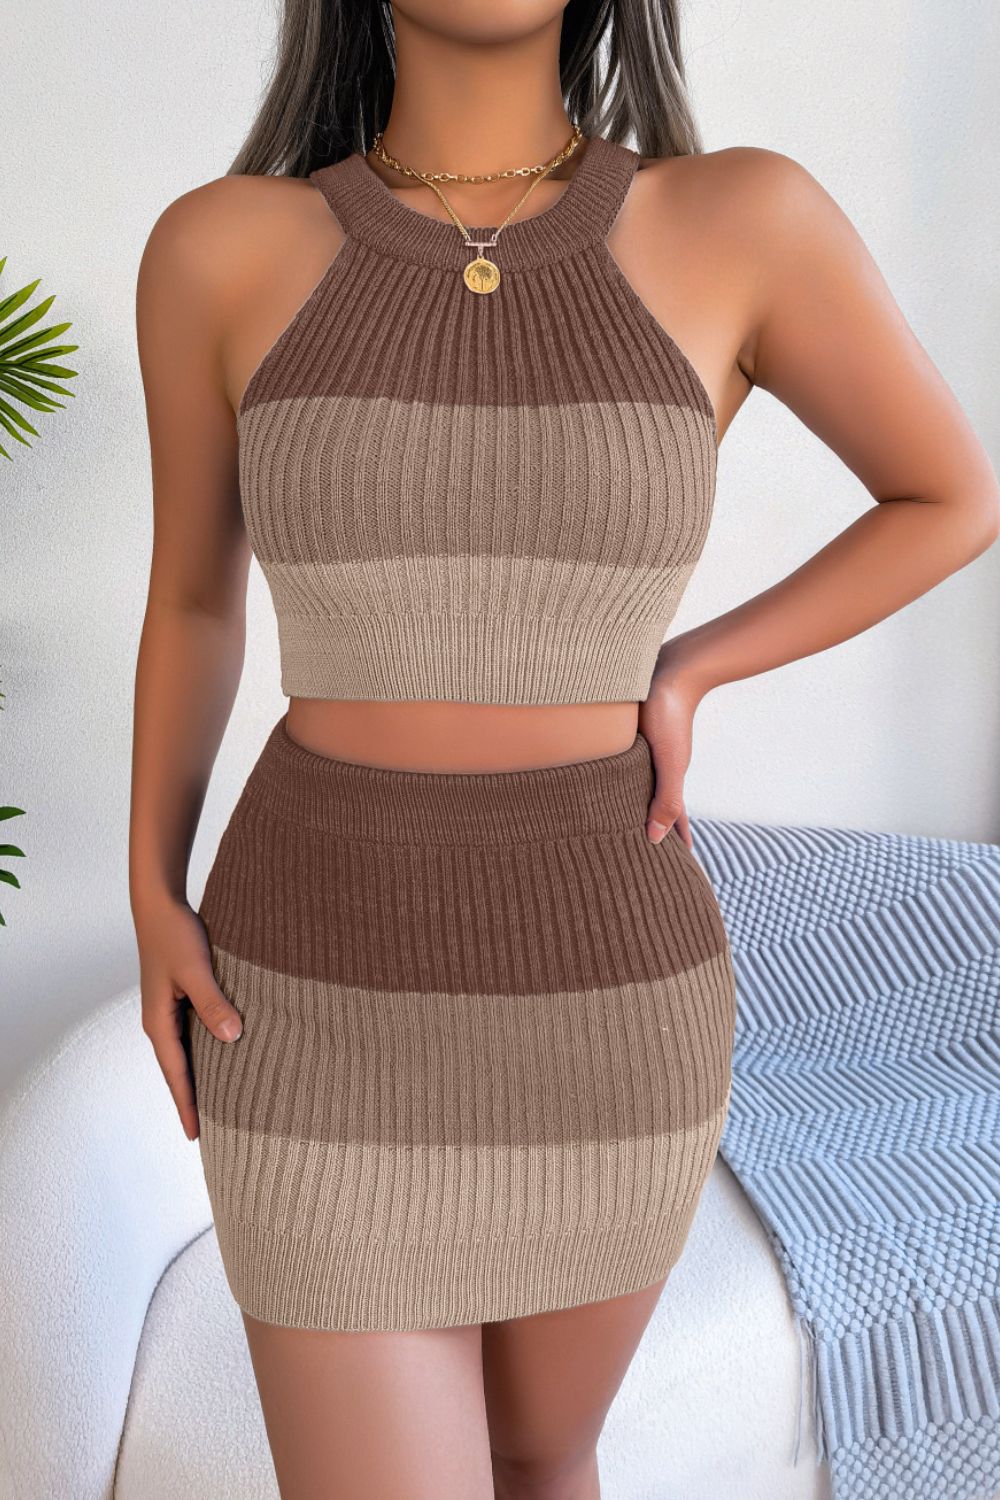 Fashionista Color Block Sleeveless Crop Knit Top and Skirt Set